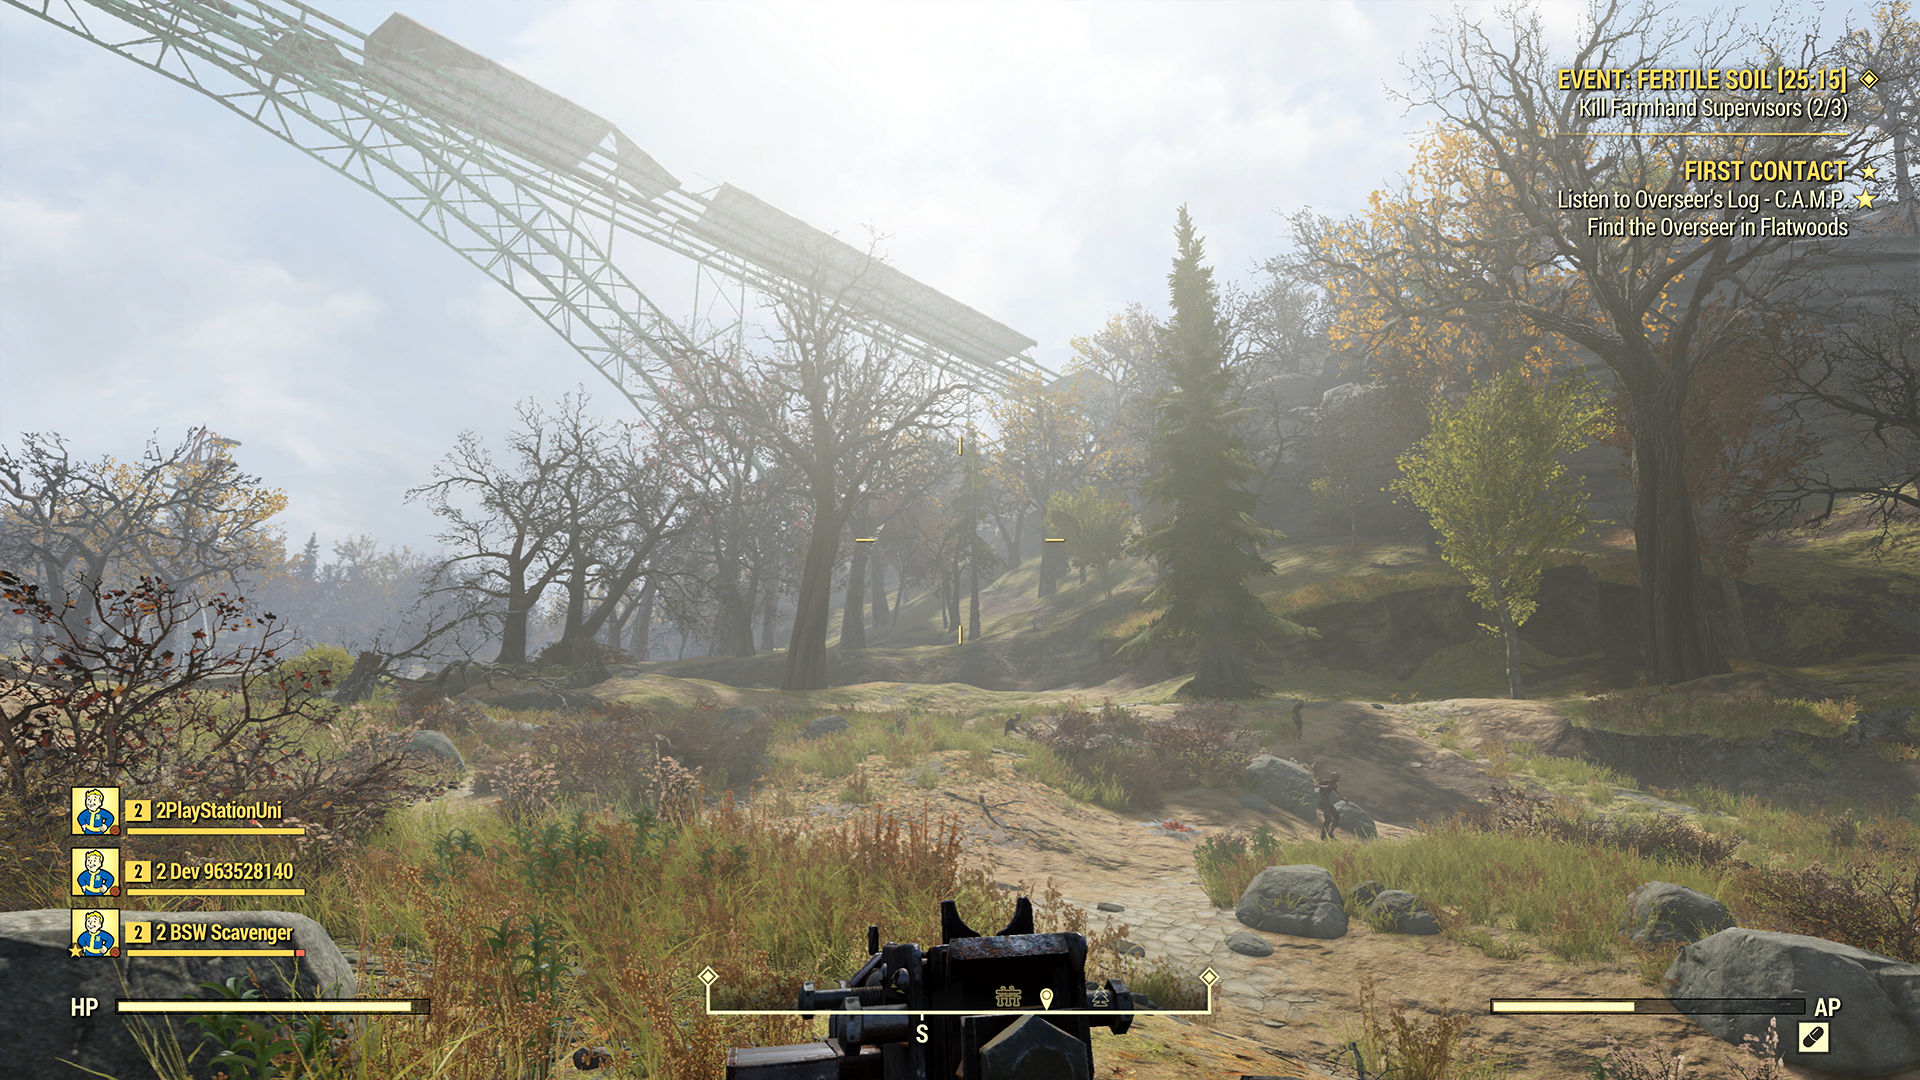 Why is Fallout 76 Set in the Foothills of West Virginia?